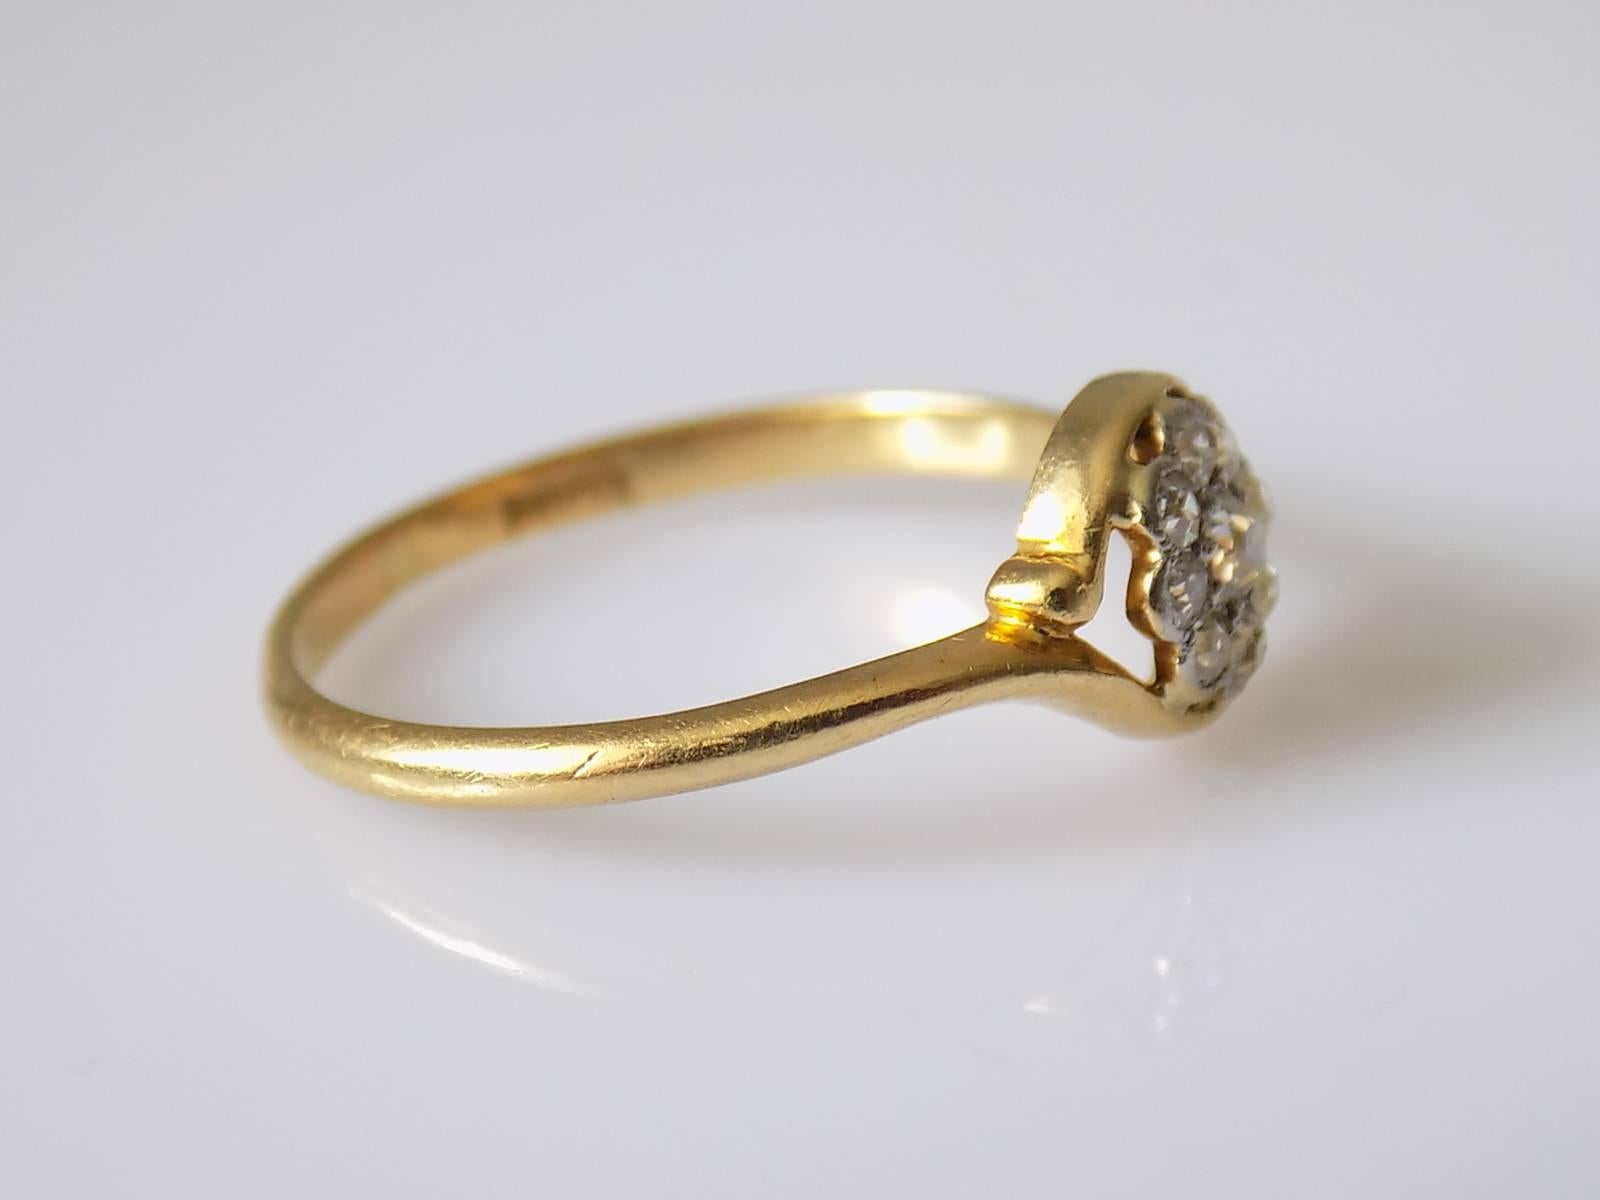 A Lovely Antique Edwardian c.1910 18 Carat Gold and 0.23 Carat Old European cut Diamond Daisy cluster engagement ring. English origin.
Size O UK, 7.5 US.
Height of the face 8mm.
Total weight of the Diamonds approx. 0.23 Carat.
Weight 2.0gr.
Marked